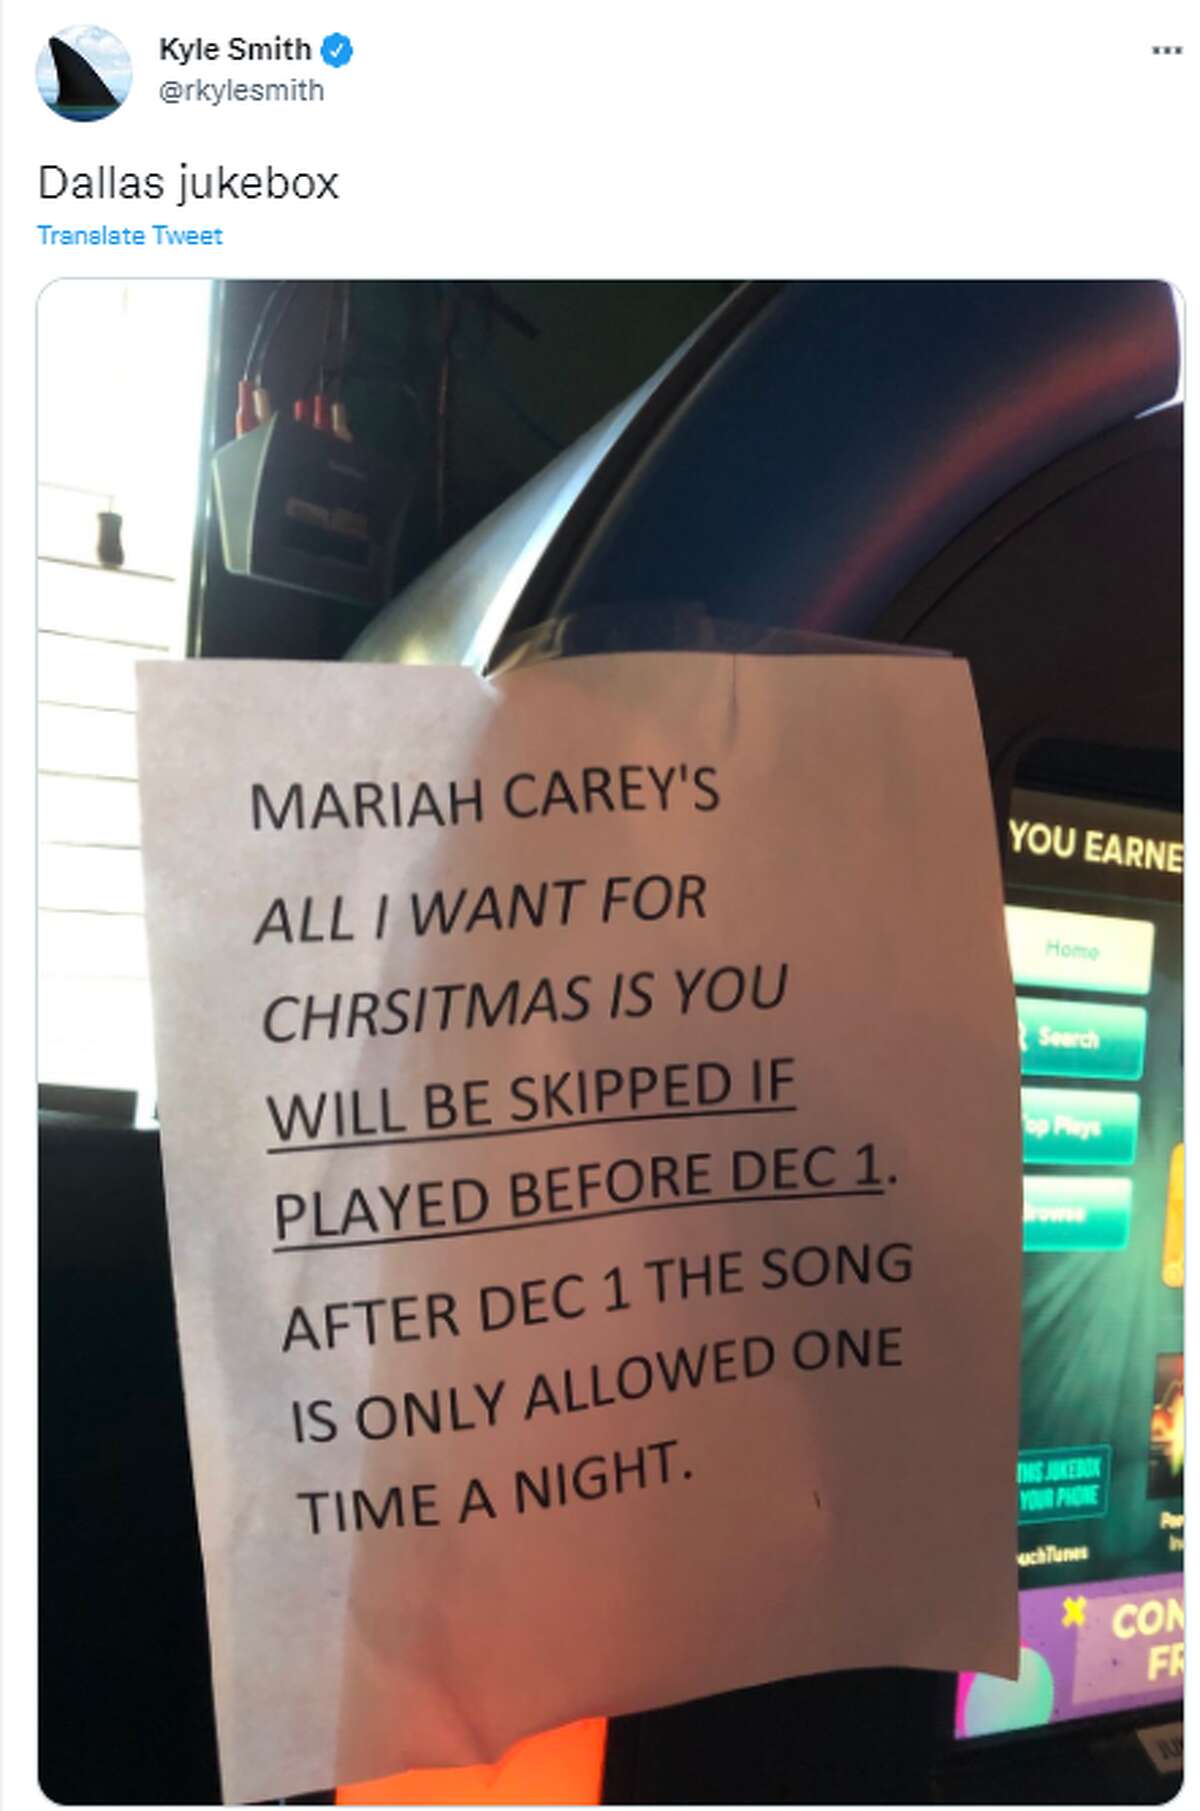 Dallas bar Stoneleigh P., went viral after a sign on their jukebox caused an uproar on social media.